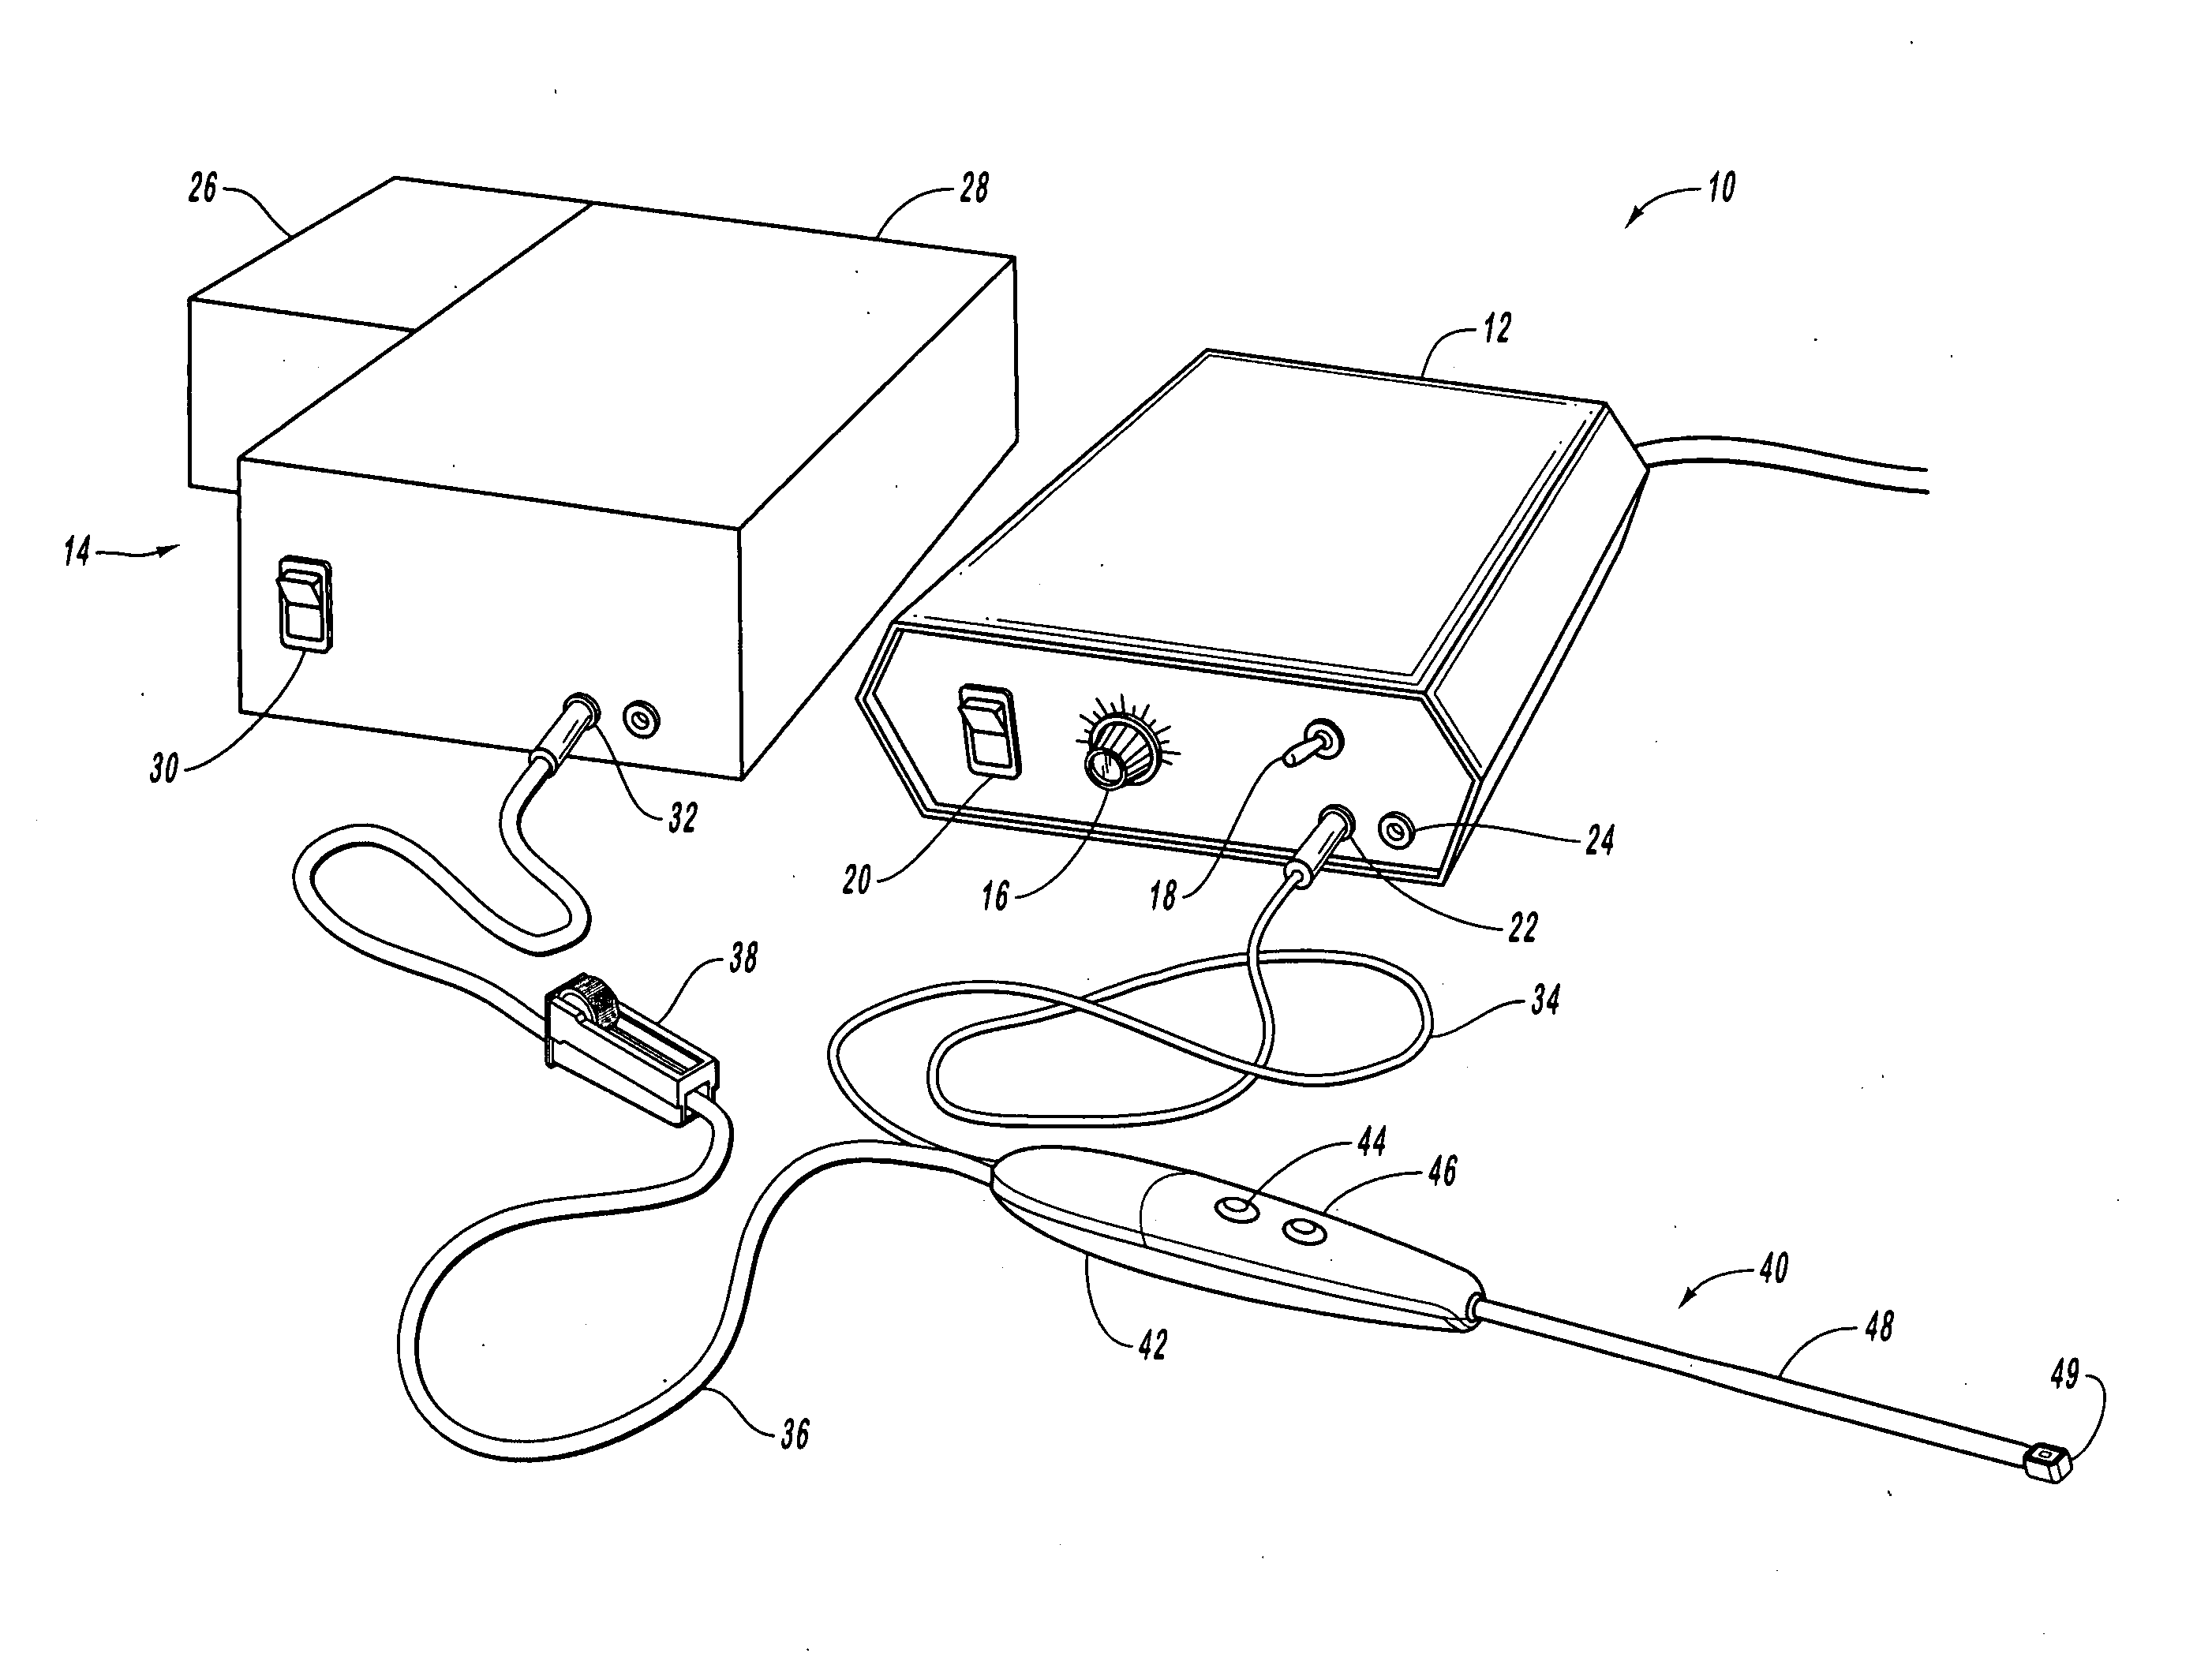 Electrosurgical instrument with an ablation mode and a coagulation mode